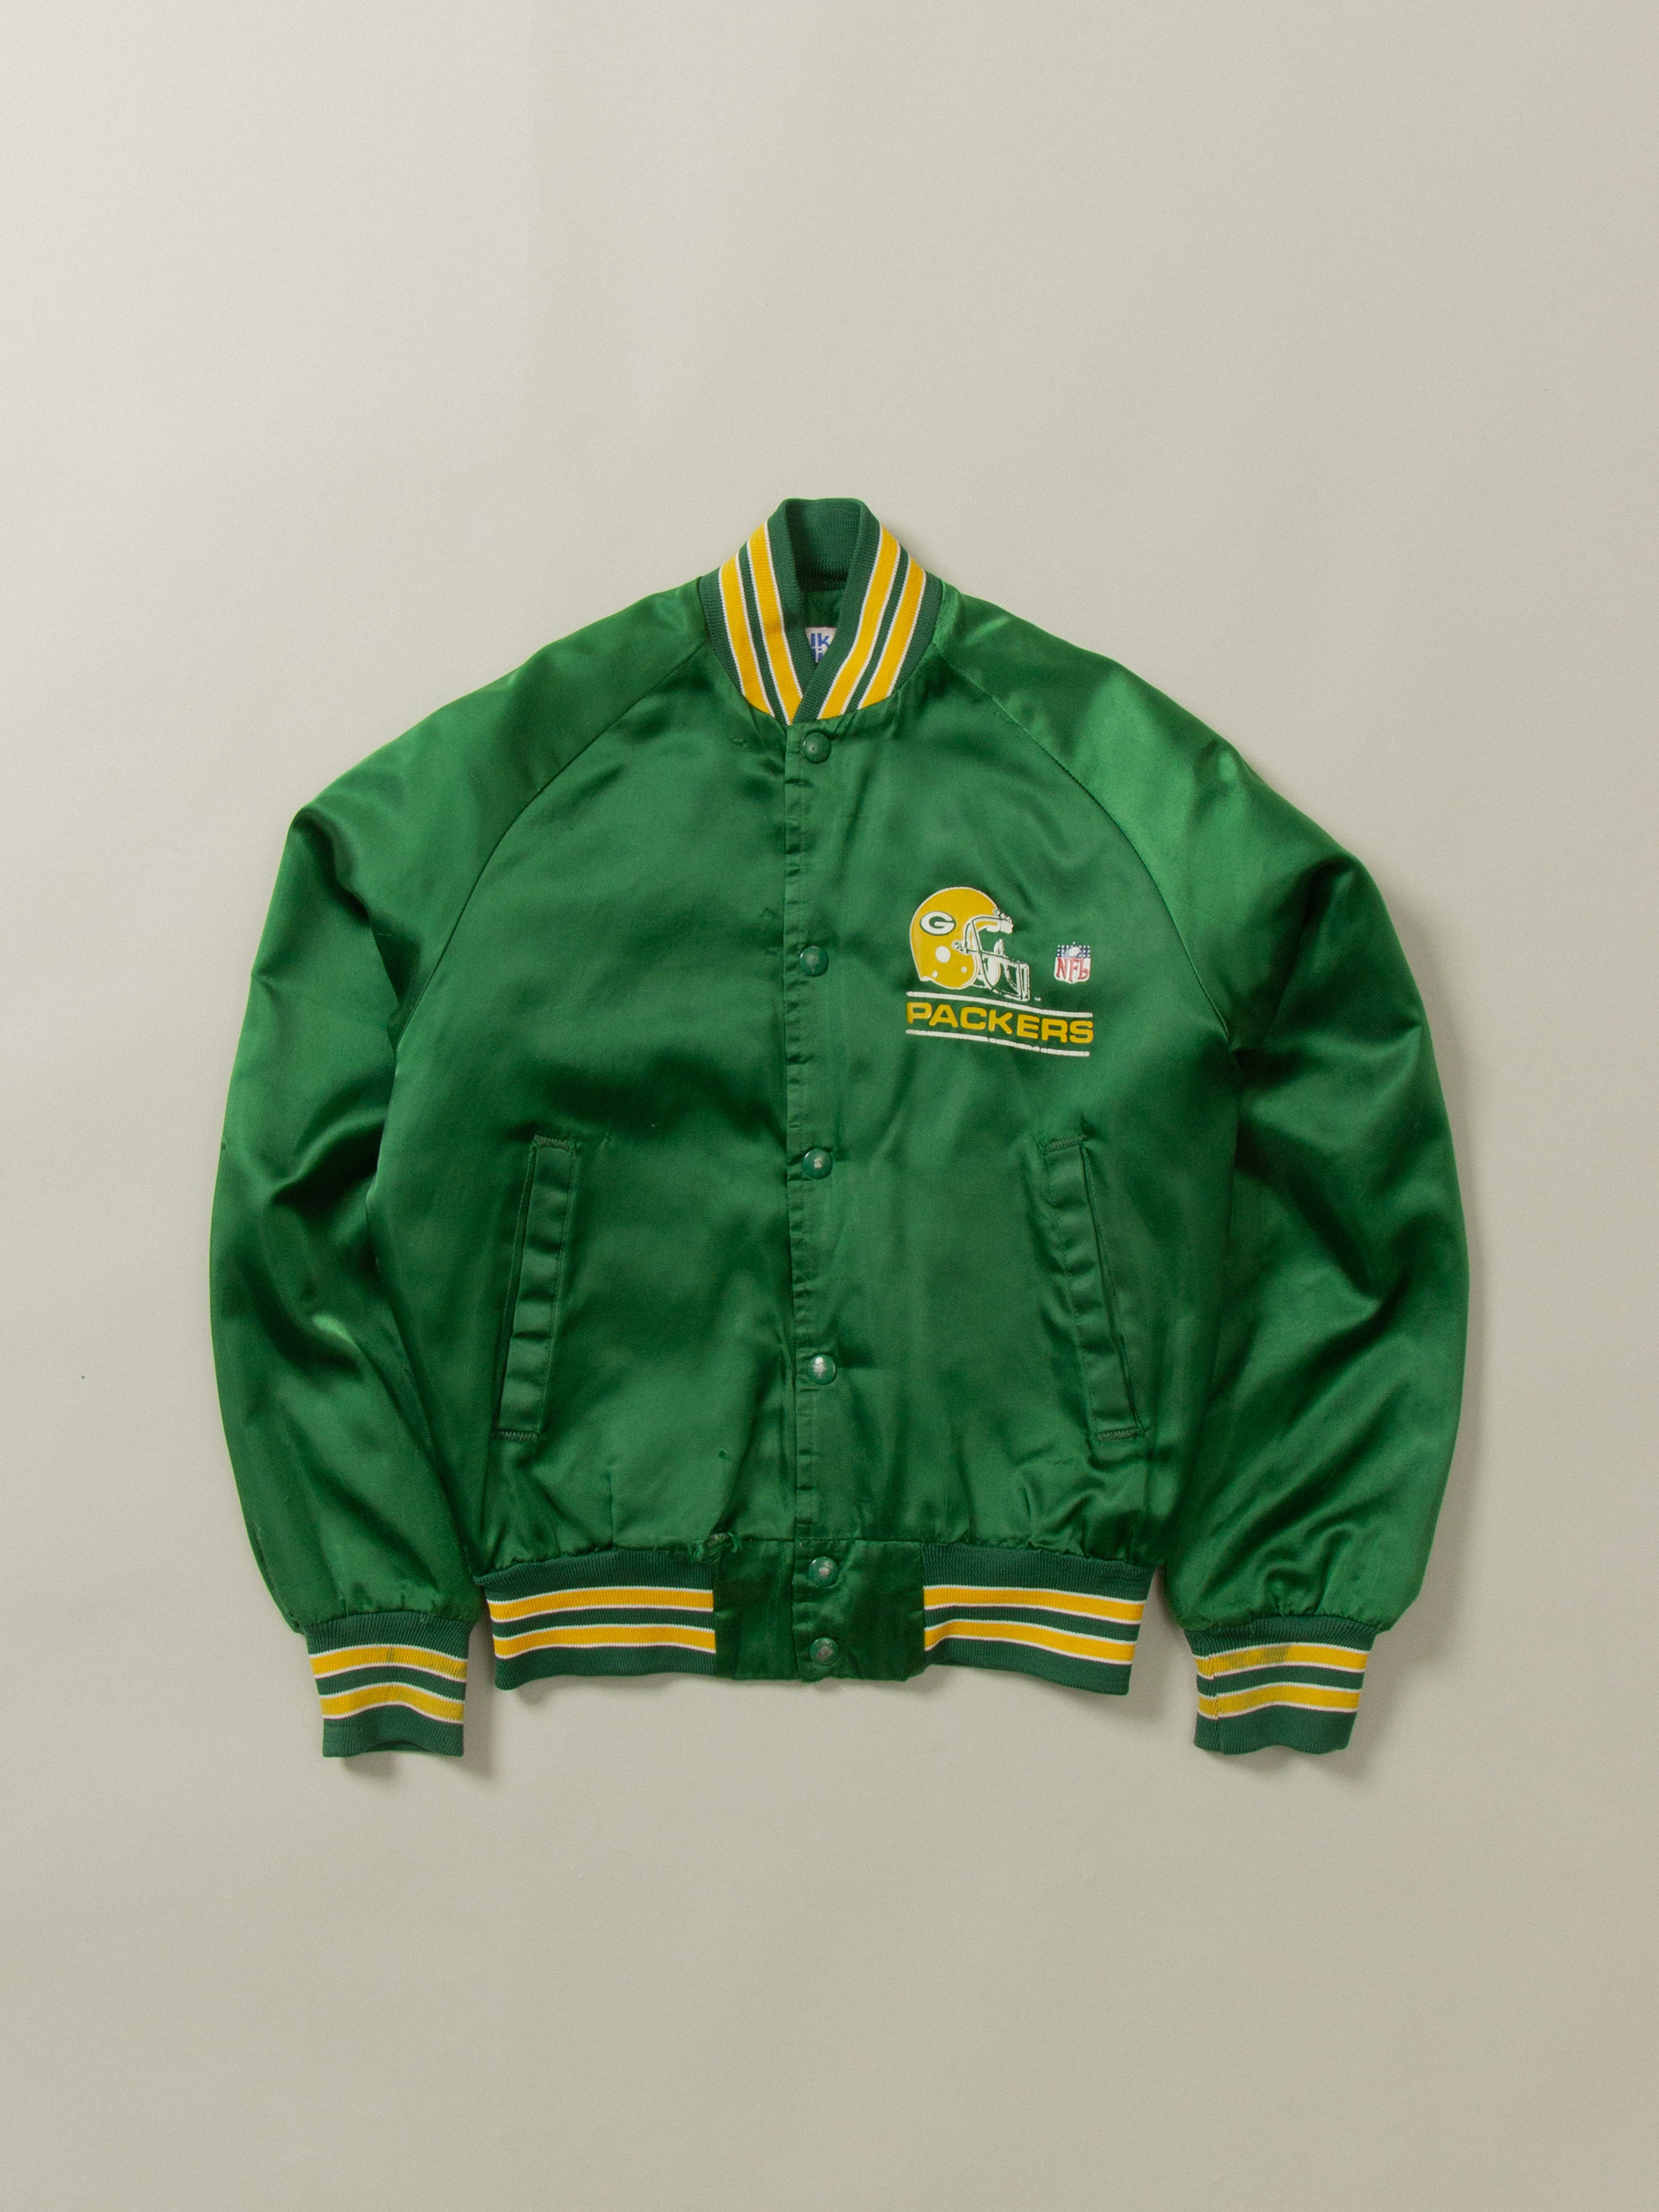 Vtg 1990s Green Bay Packers Nylon Sports Jacket - Made in USA (XS)